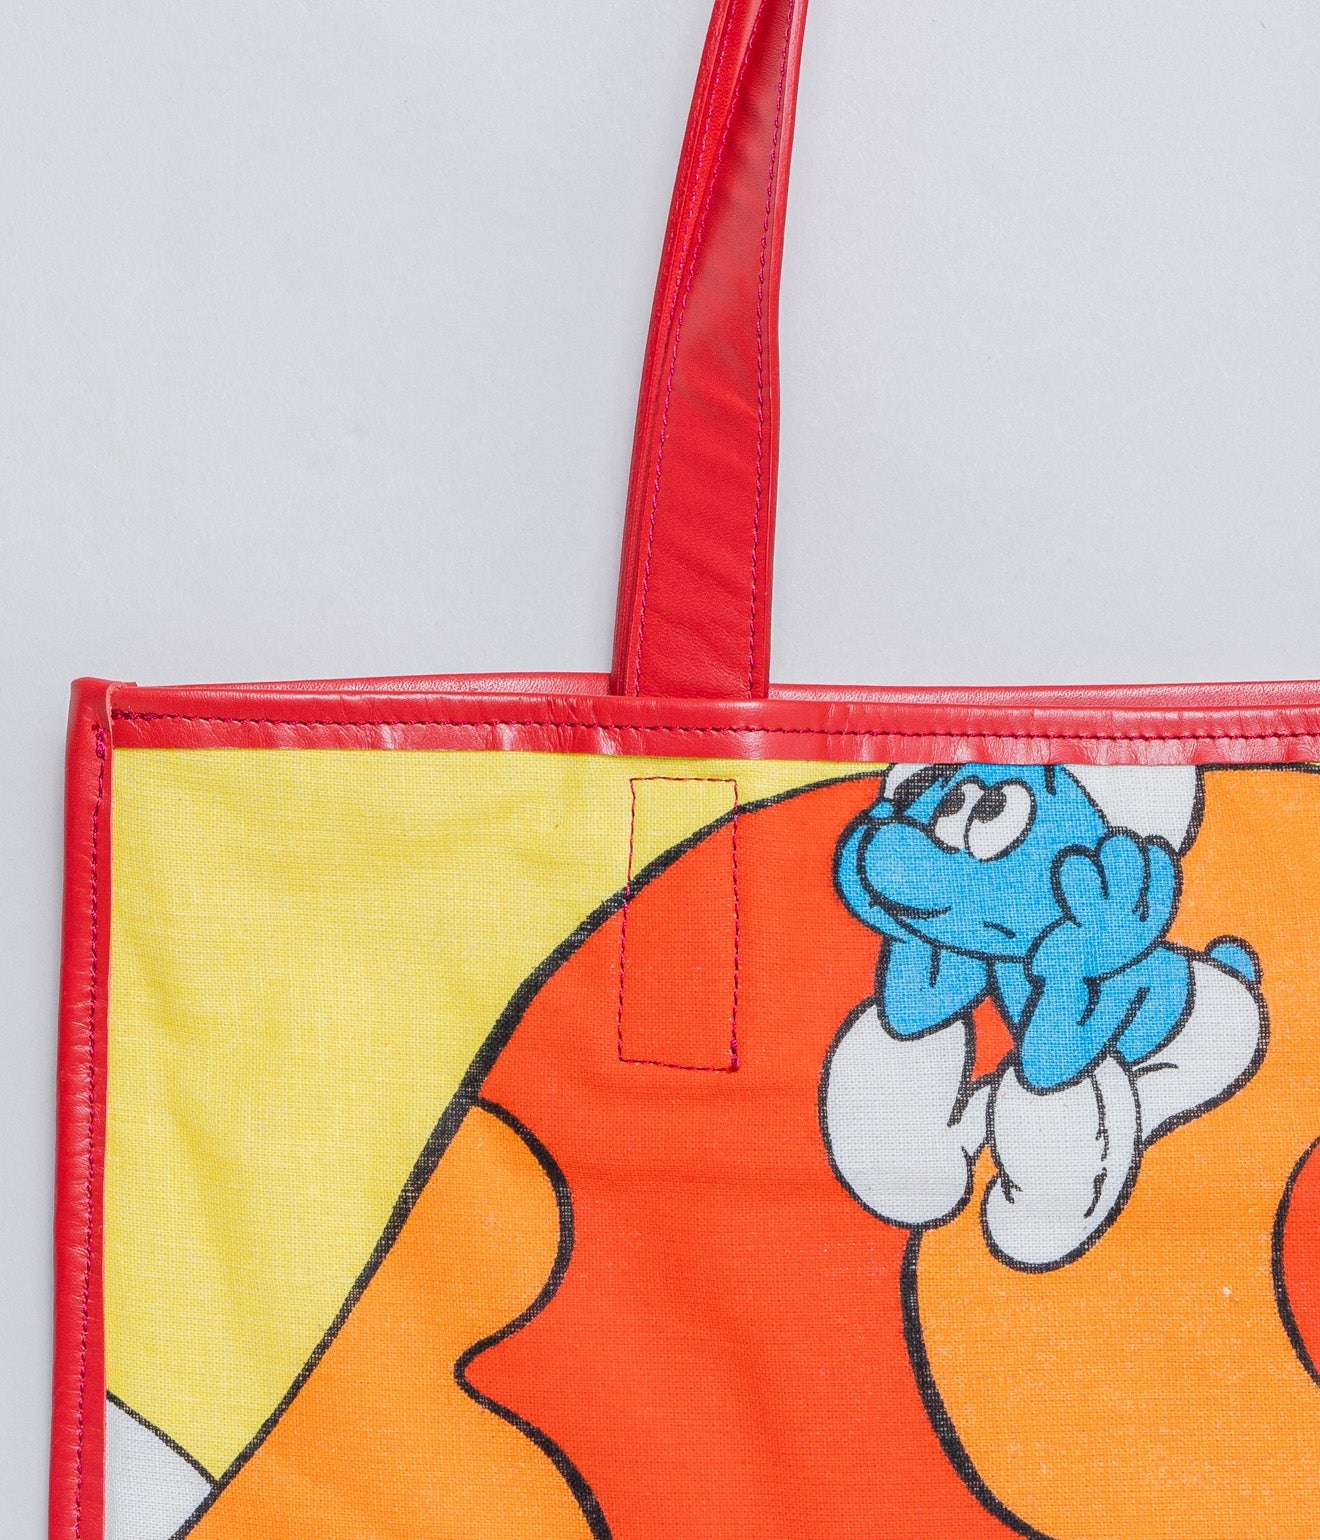 WEAREALLANIMALS UPCYCLE ”Piping Flat Tote -Vintage Smurf Fabric-" #1 - WEAREALLANIMALS